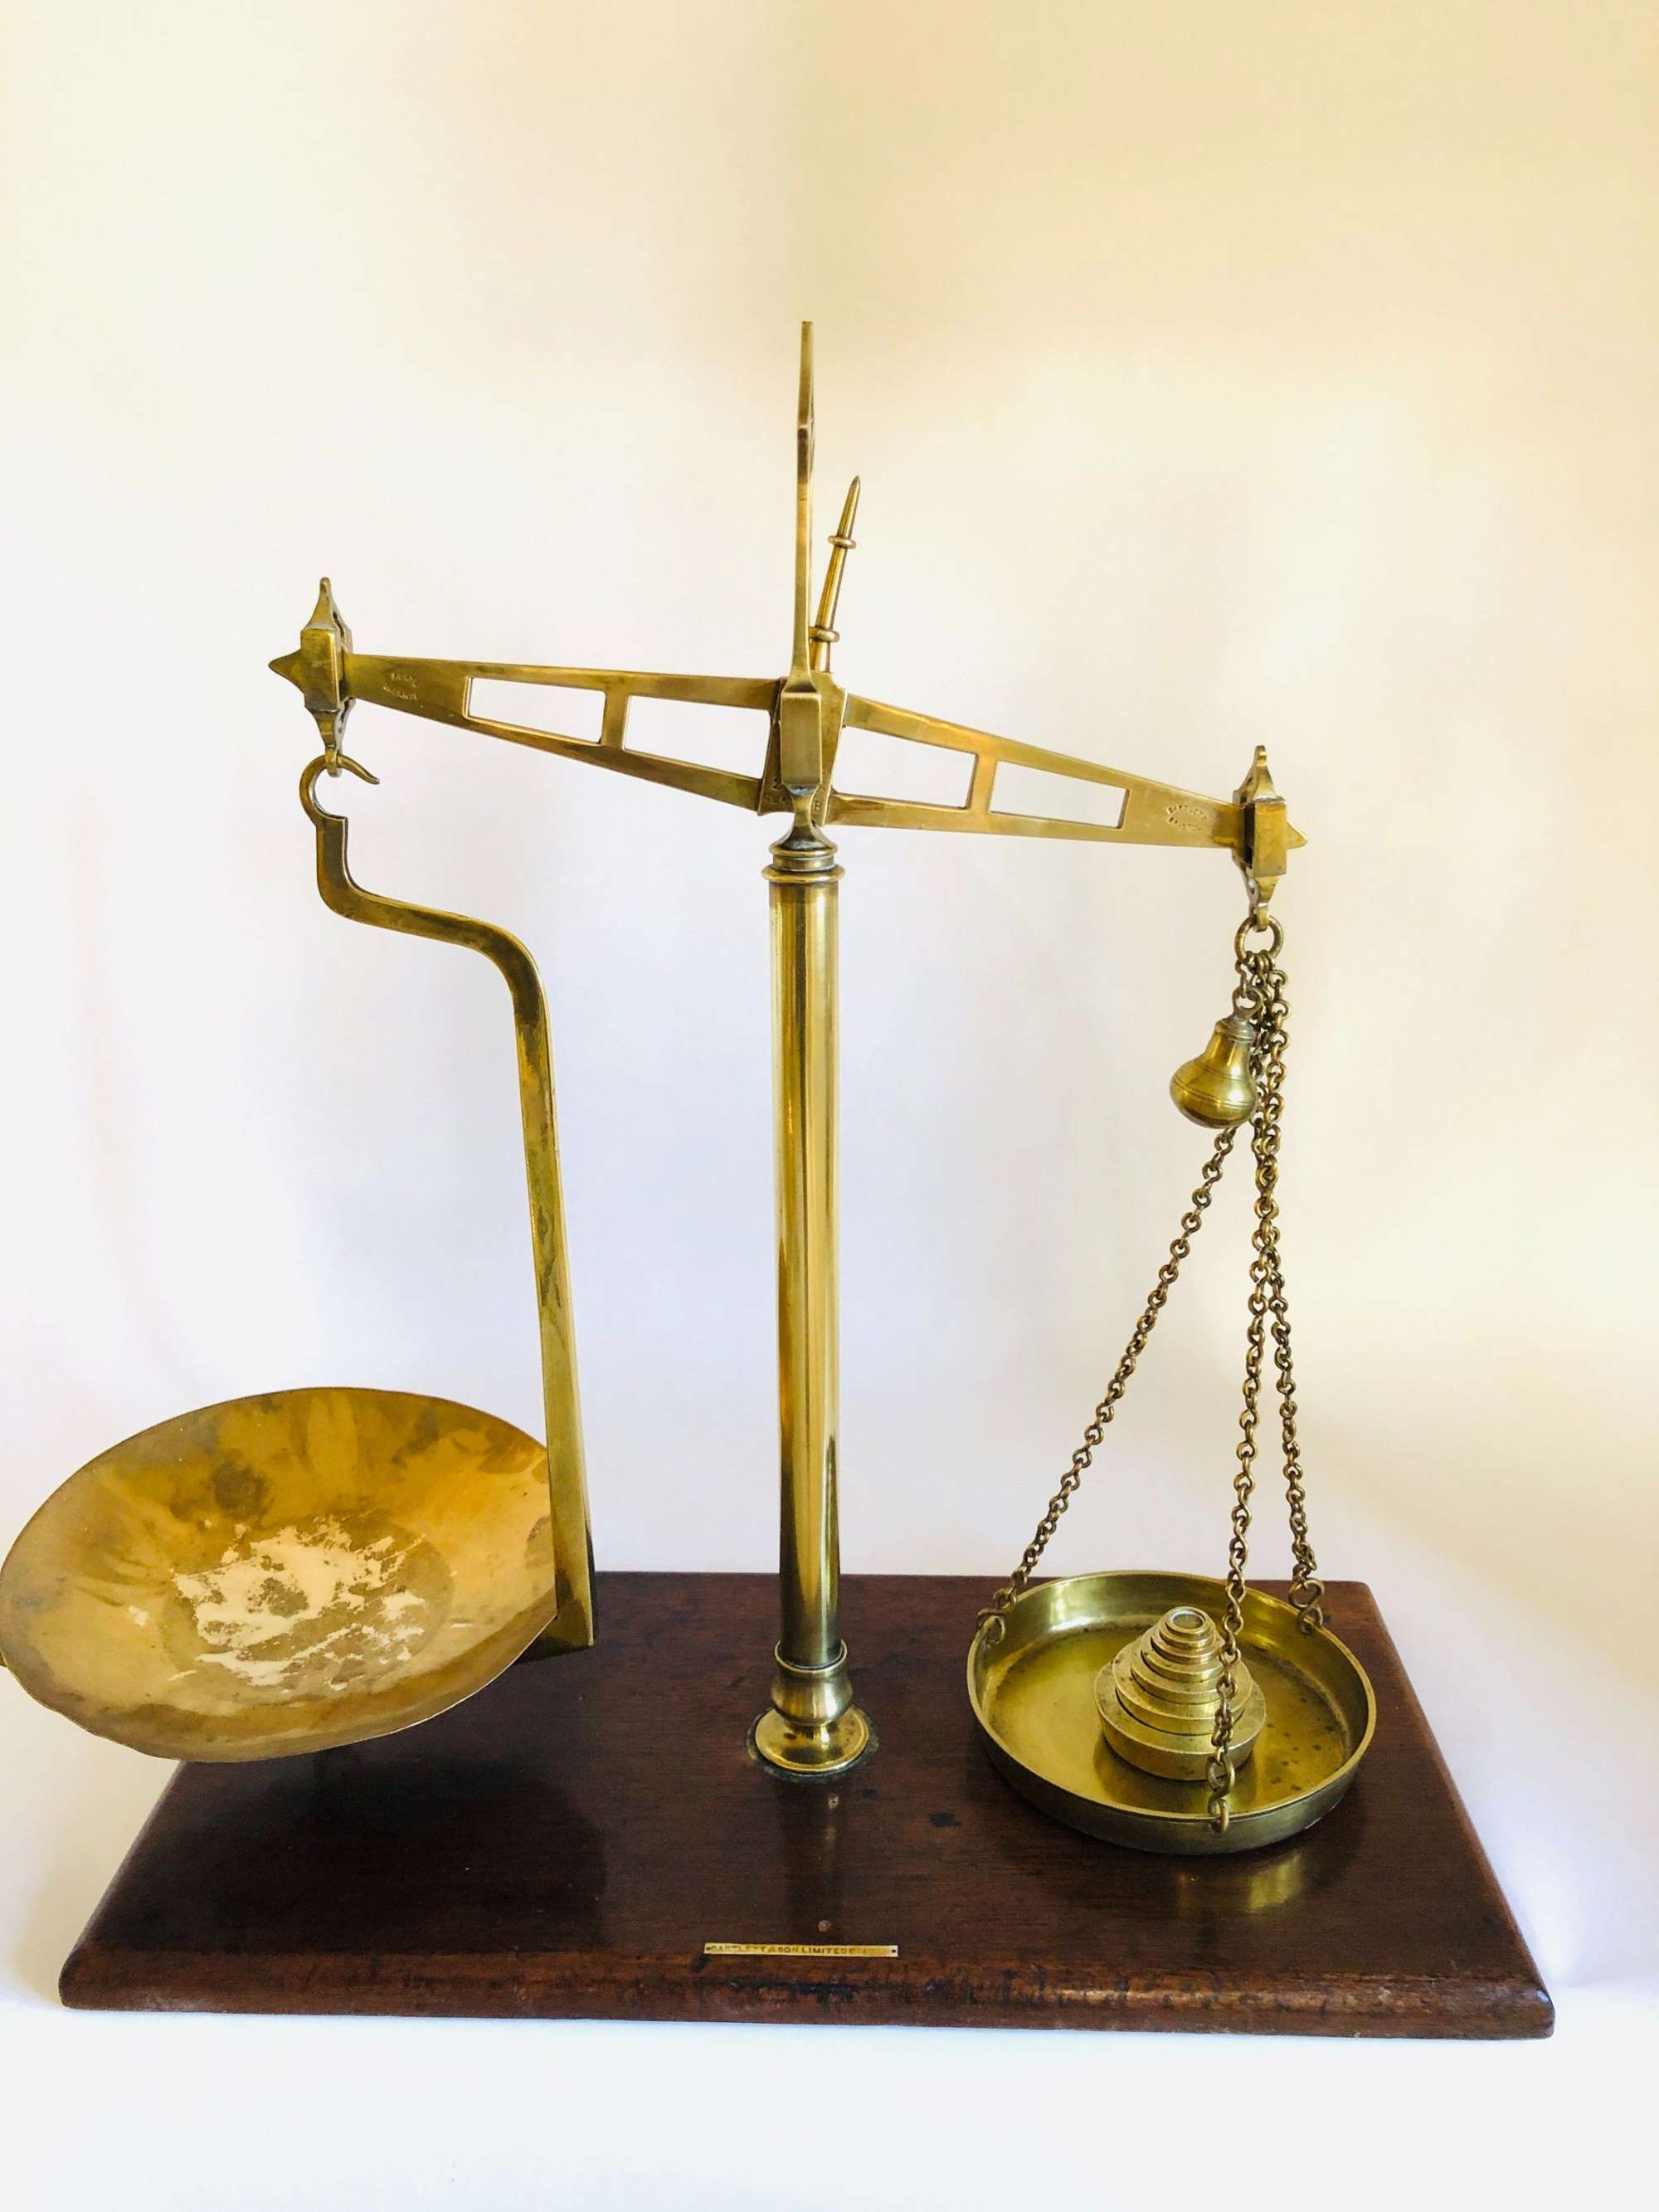 Pair Of Antique Brass Scales